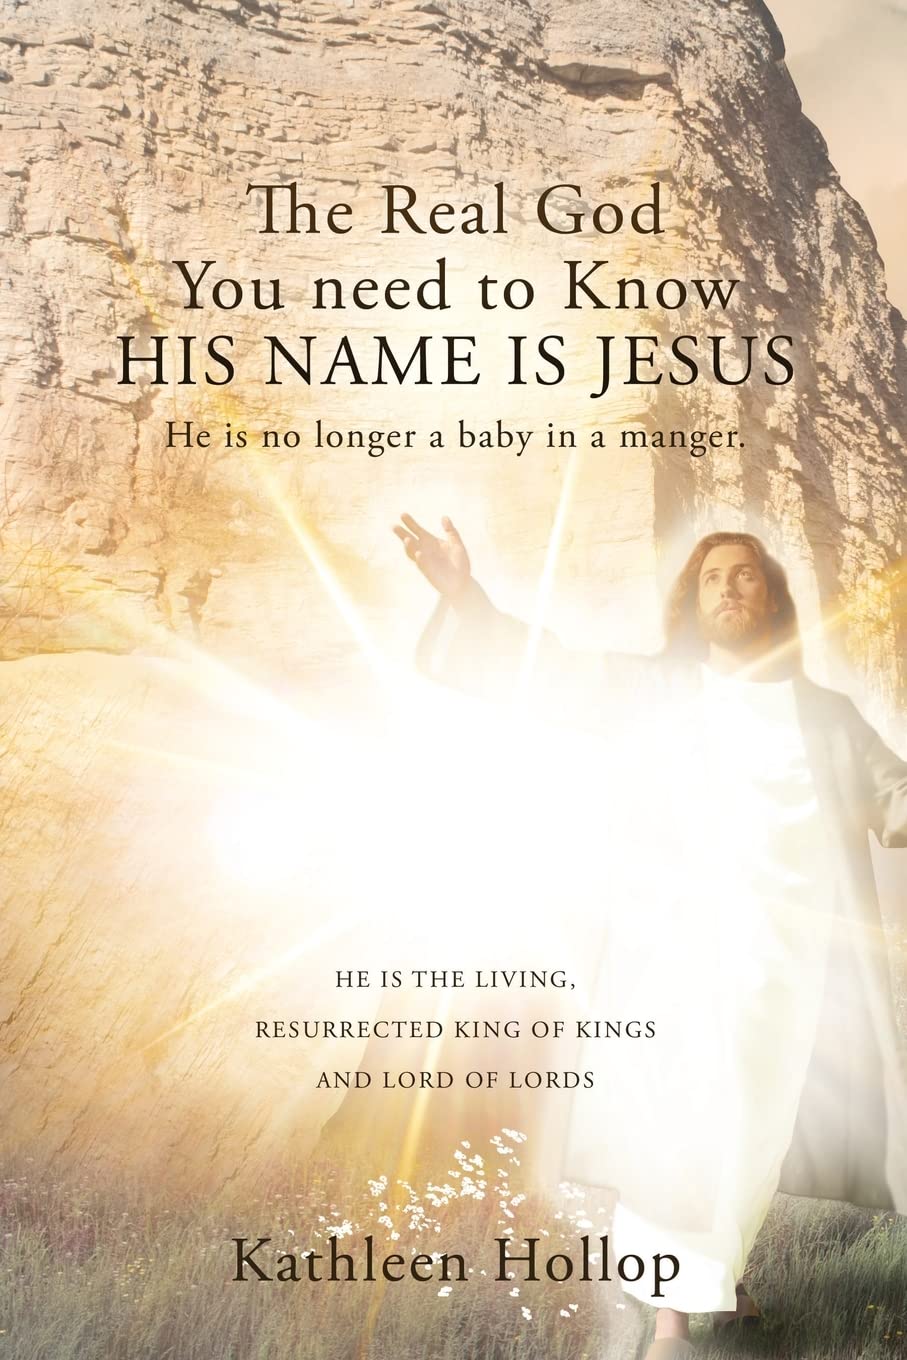 Discover the Truth: "The Real God You Need to Know" by Kathleen Hollop Unveils the Power of Jesus Beyond the Manger